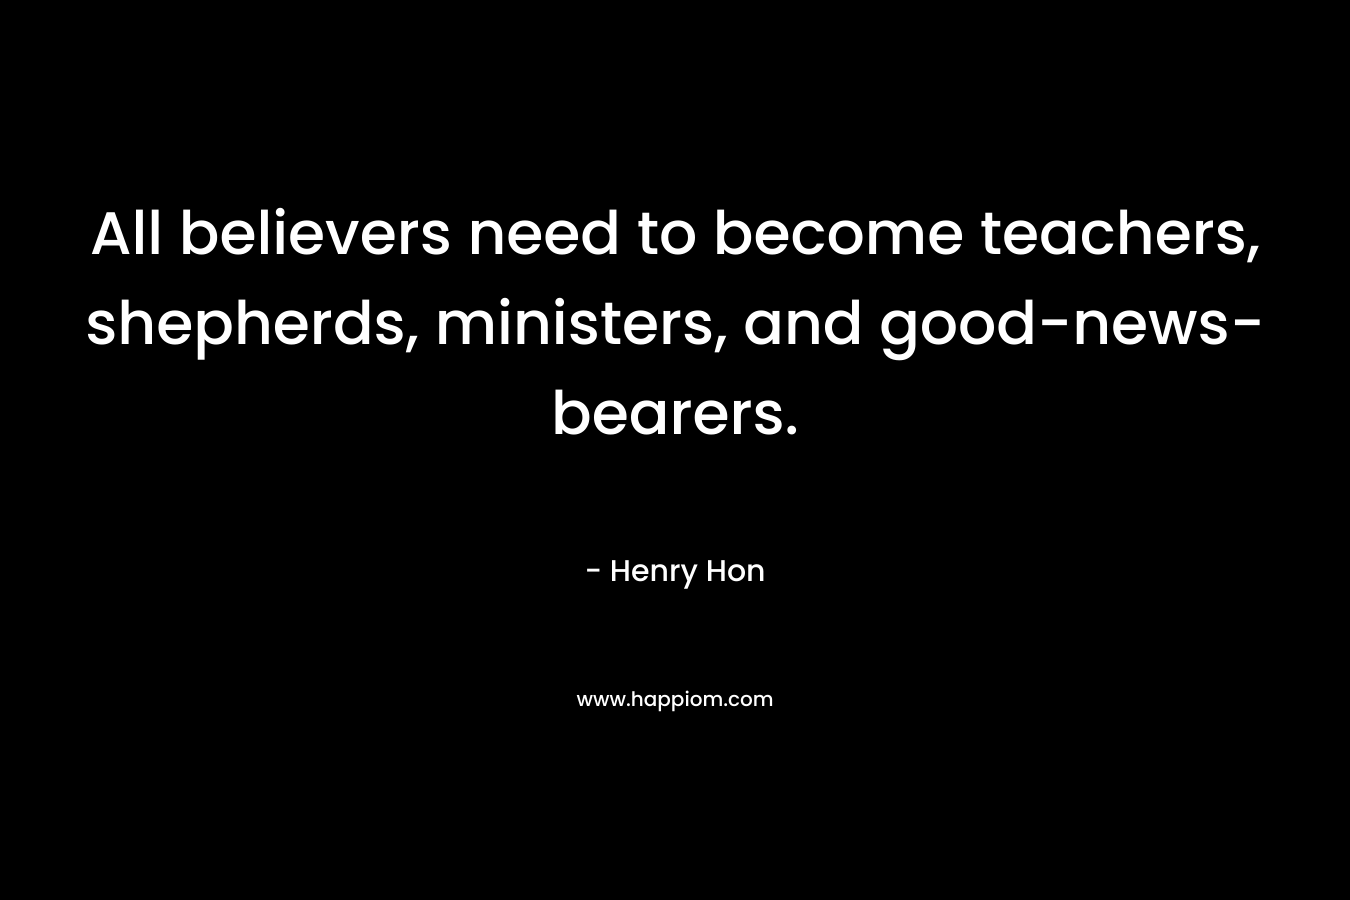 All believers need to become teachers, shepherds, ministers, and good-news-bearers.